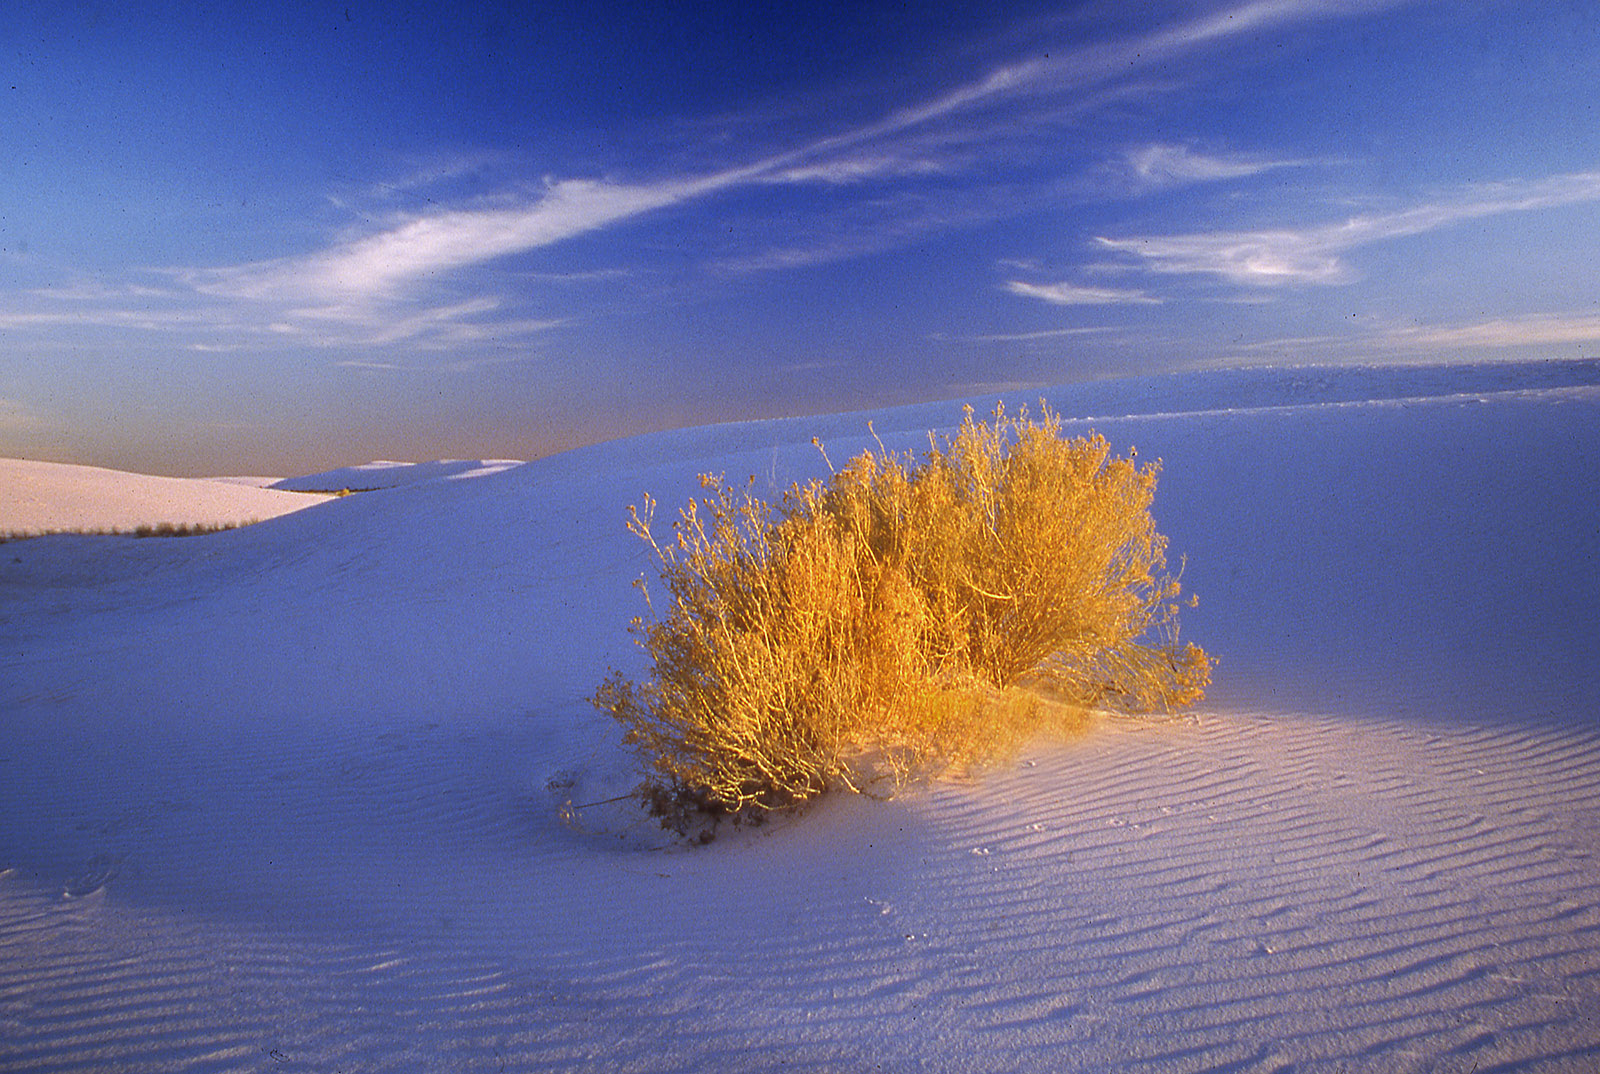 A Splash of Light at White Sands, New Mexico